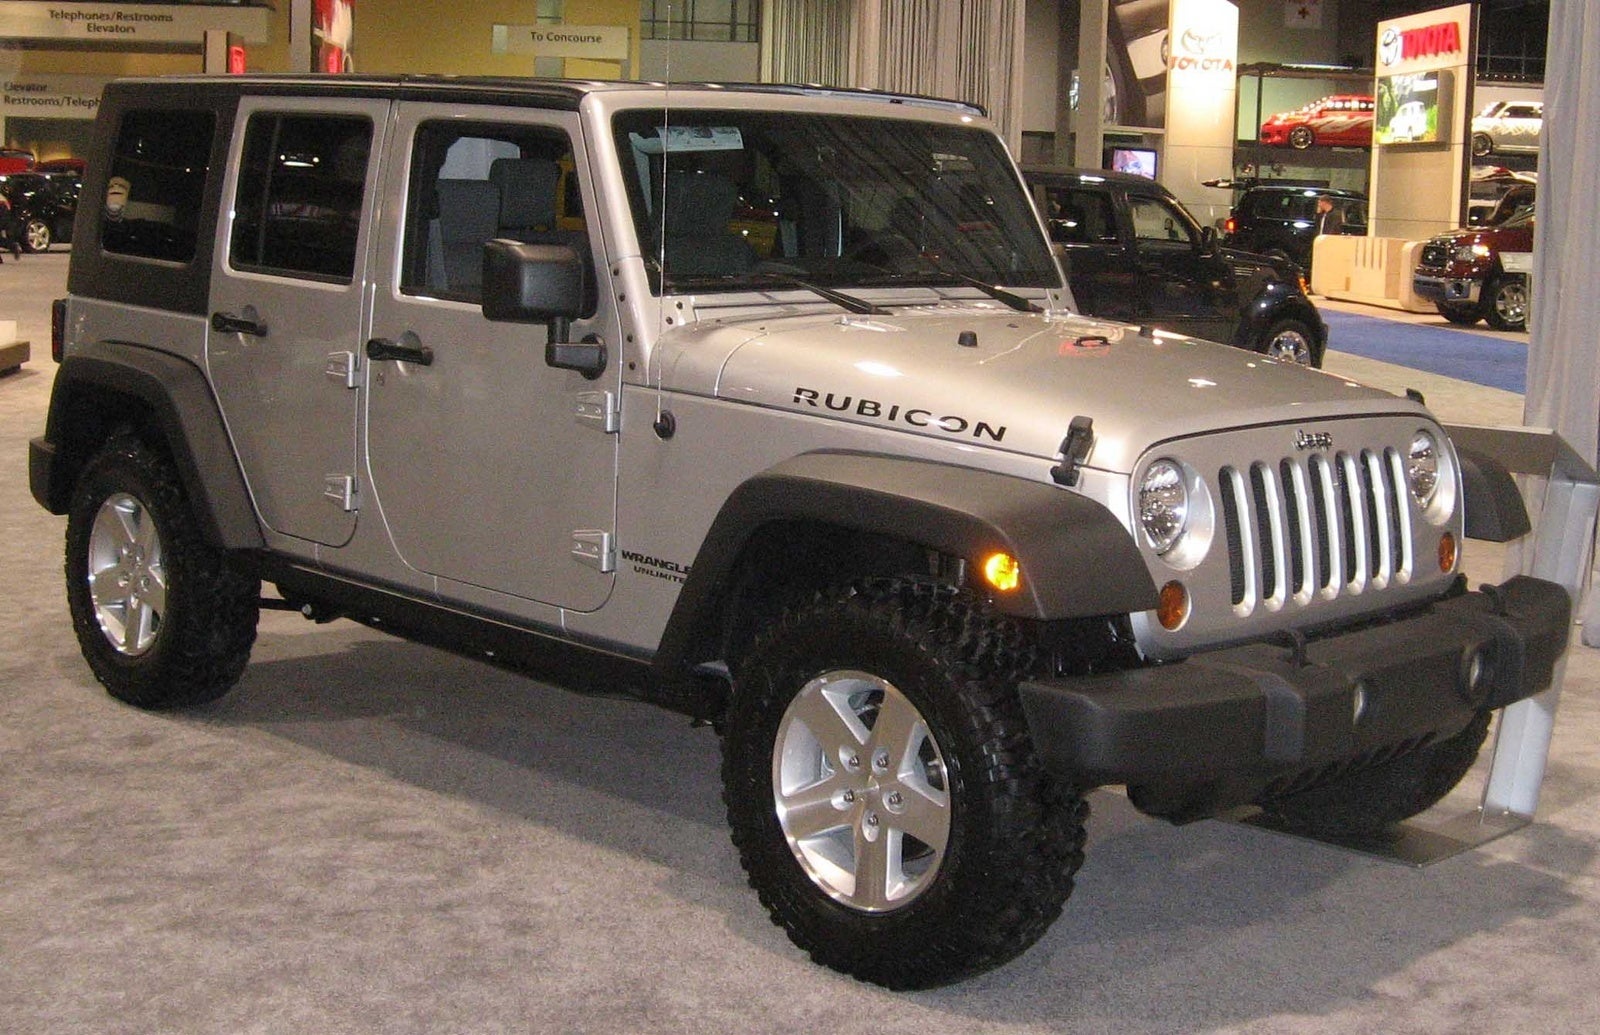 Jeep Wrangler Questions - i have low credit score what if i file bankrupt  will that help or hind... - CarGurus